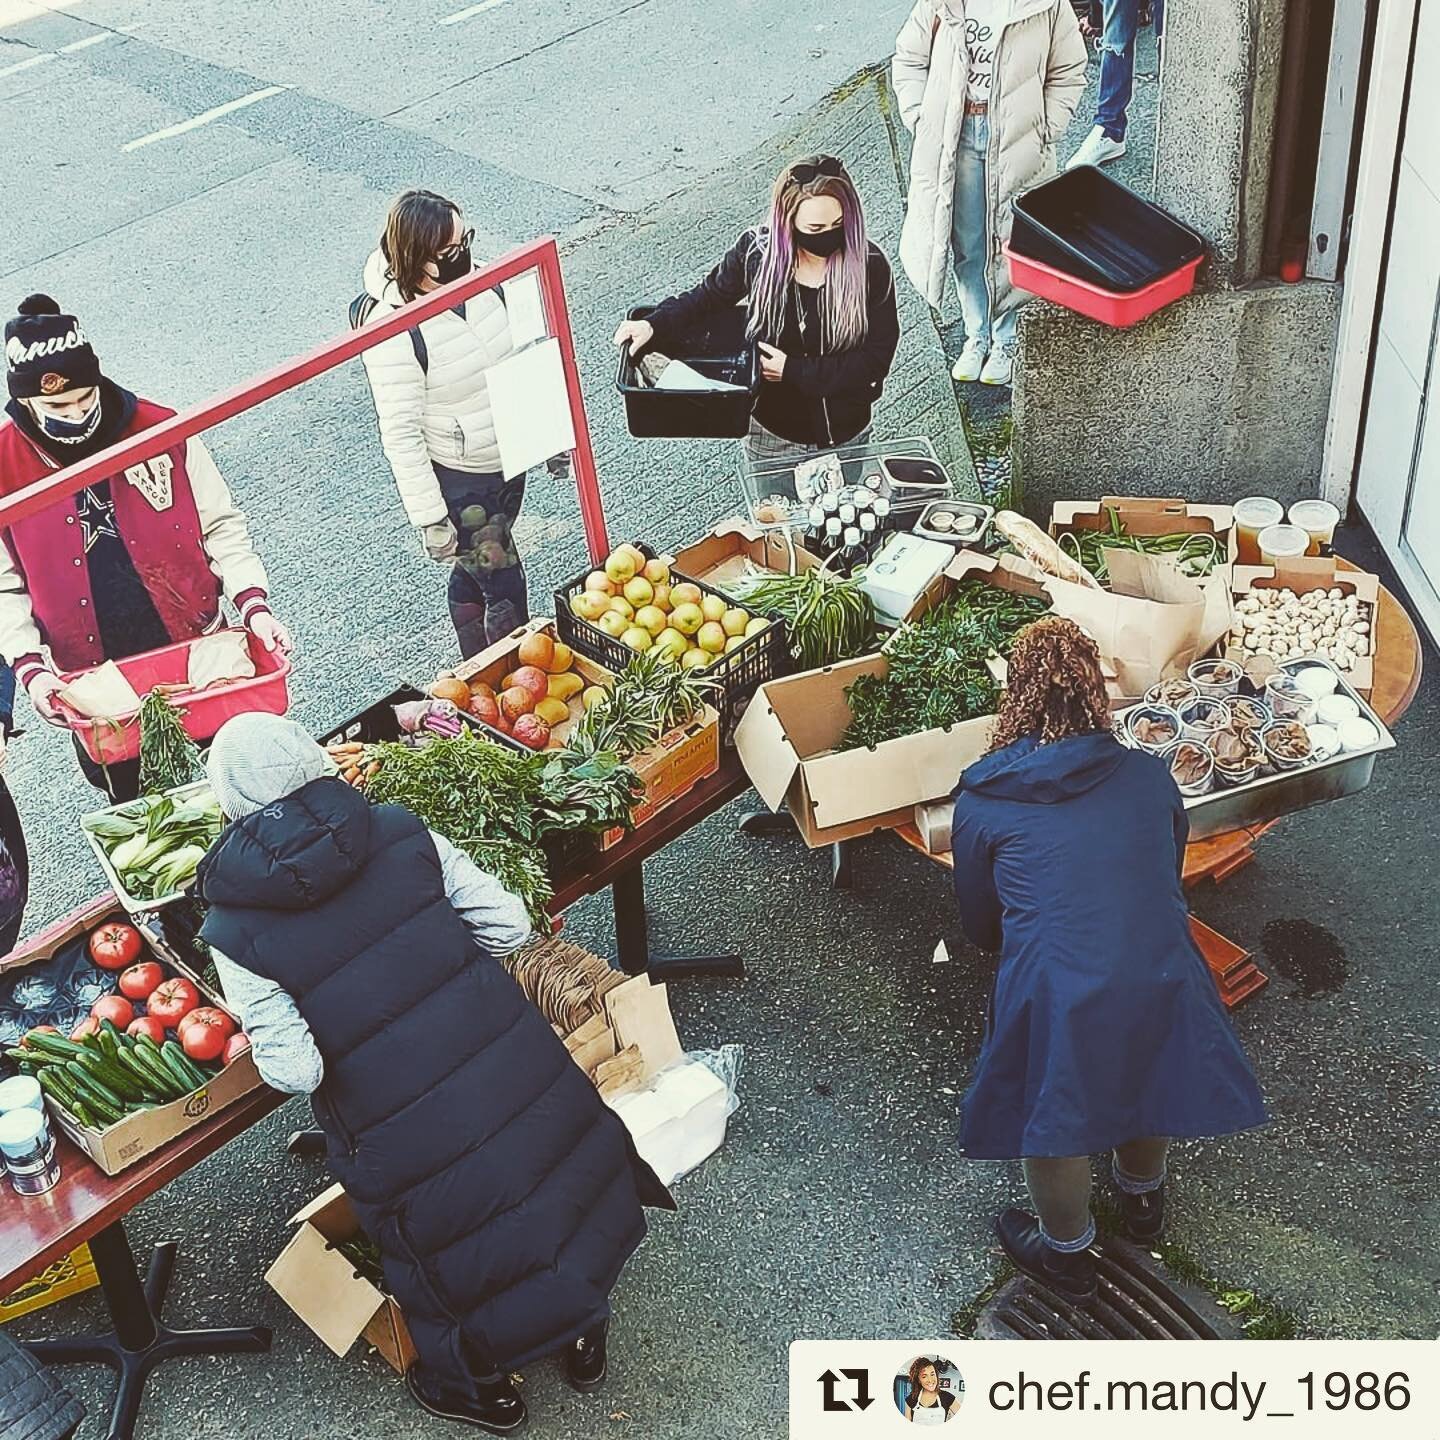 Thank you to all for coming this past Sunday to our &ldquo;Small Fish&rdquo; market. (Get it, we&rsquo;re just a small 🐟). We look forward to adding more goods each week based on your recommendations, we&rsquo;re baking more bread now that we know y